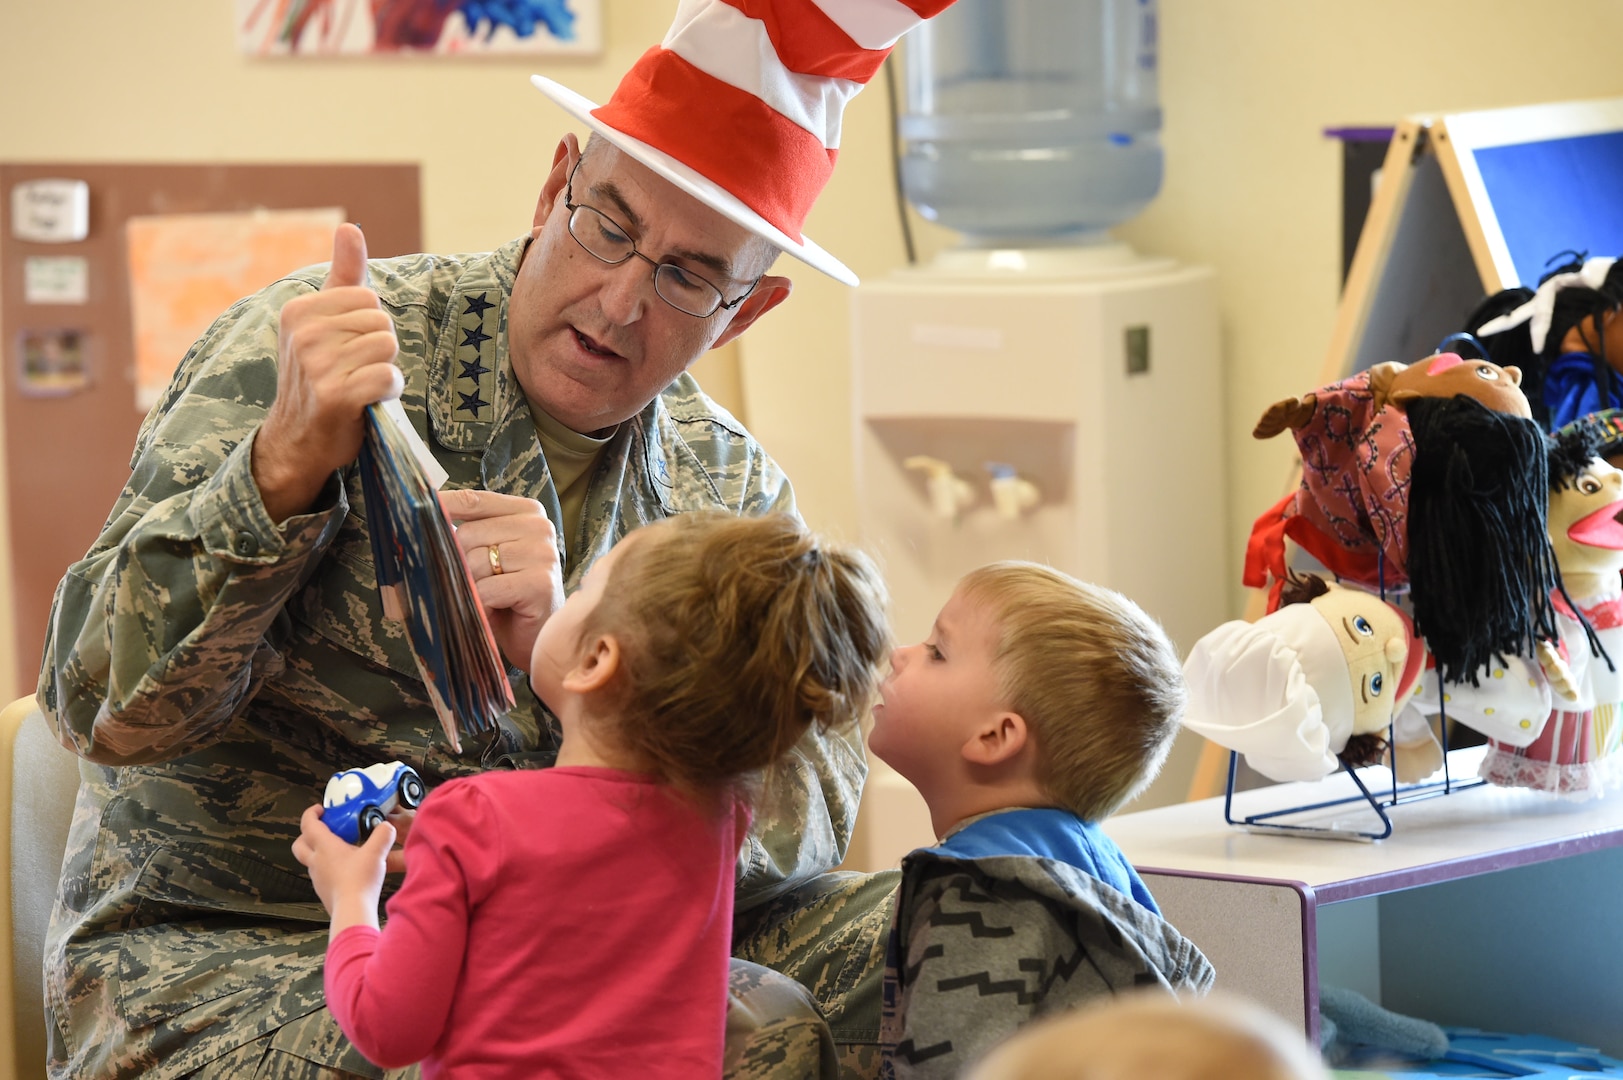 U.S. Air Force Gen. John Hyten, commander of U.S. Strategic Command (USSTRATCOM), reads to children during a visit to Child Development Center (CDC) II at Offutt Air Force Base, Neb., April 26, 2018. Hyten and other USSTRATCOM senior leaders read to children at the CDC in honor of Month of the Military Child, designated in April as a time to honor the sacrifices of the more than 1.7 million children of military members serving globally.